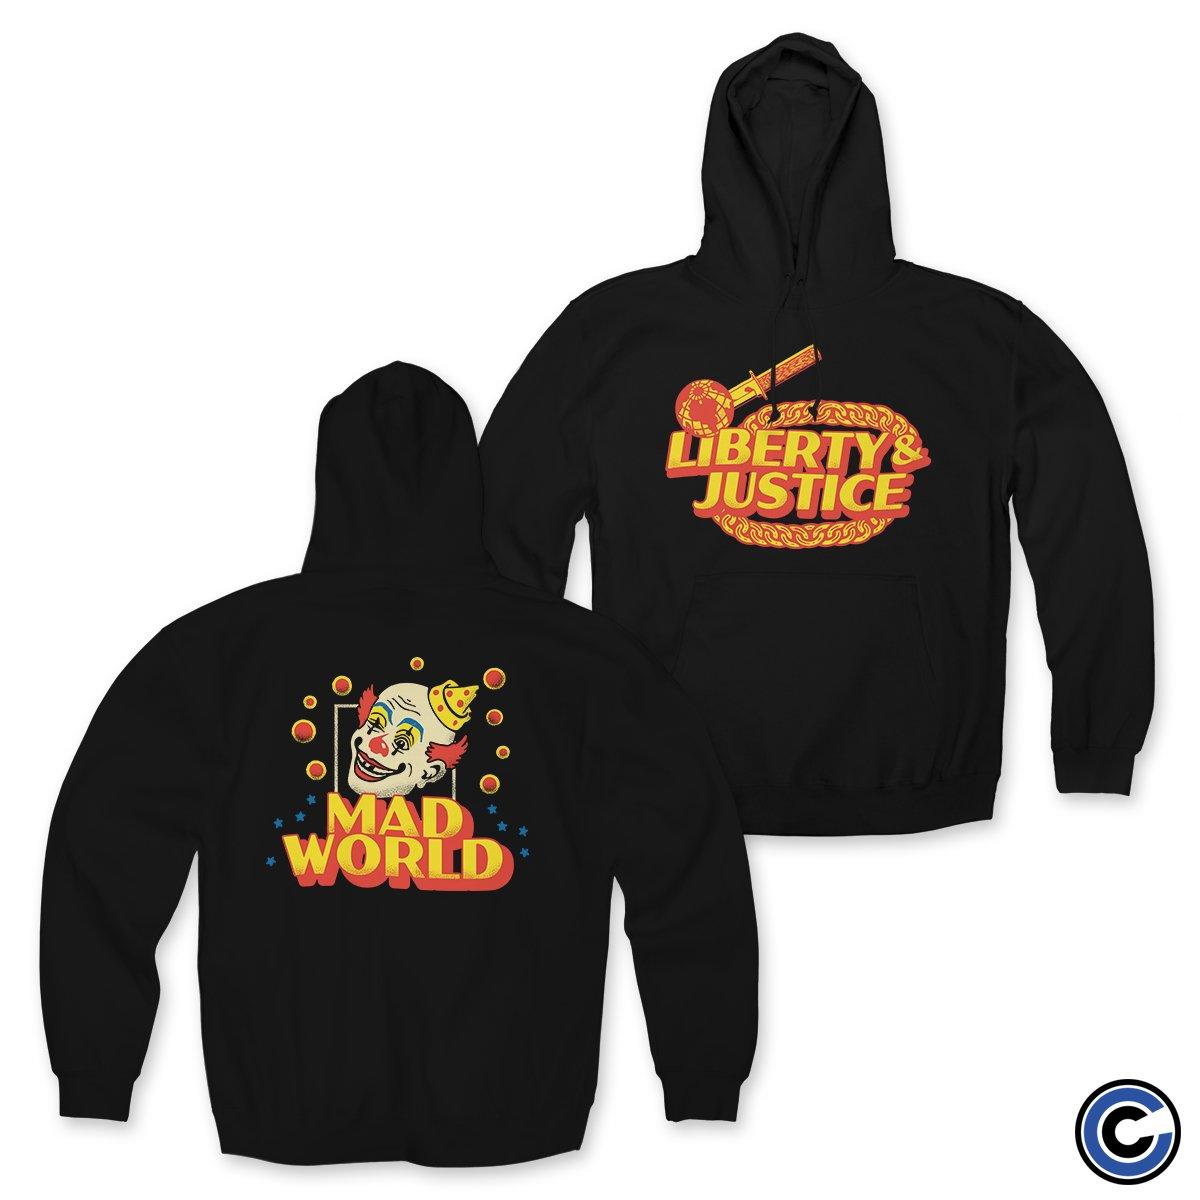 Buy – Liberty And Justice "Mad World" Hoodie – Band & Music Merch – Cold Cuts Merch